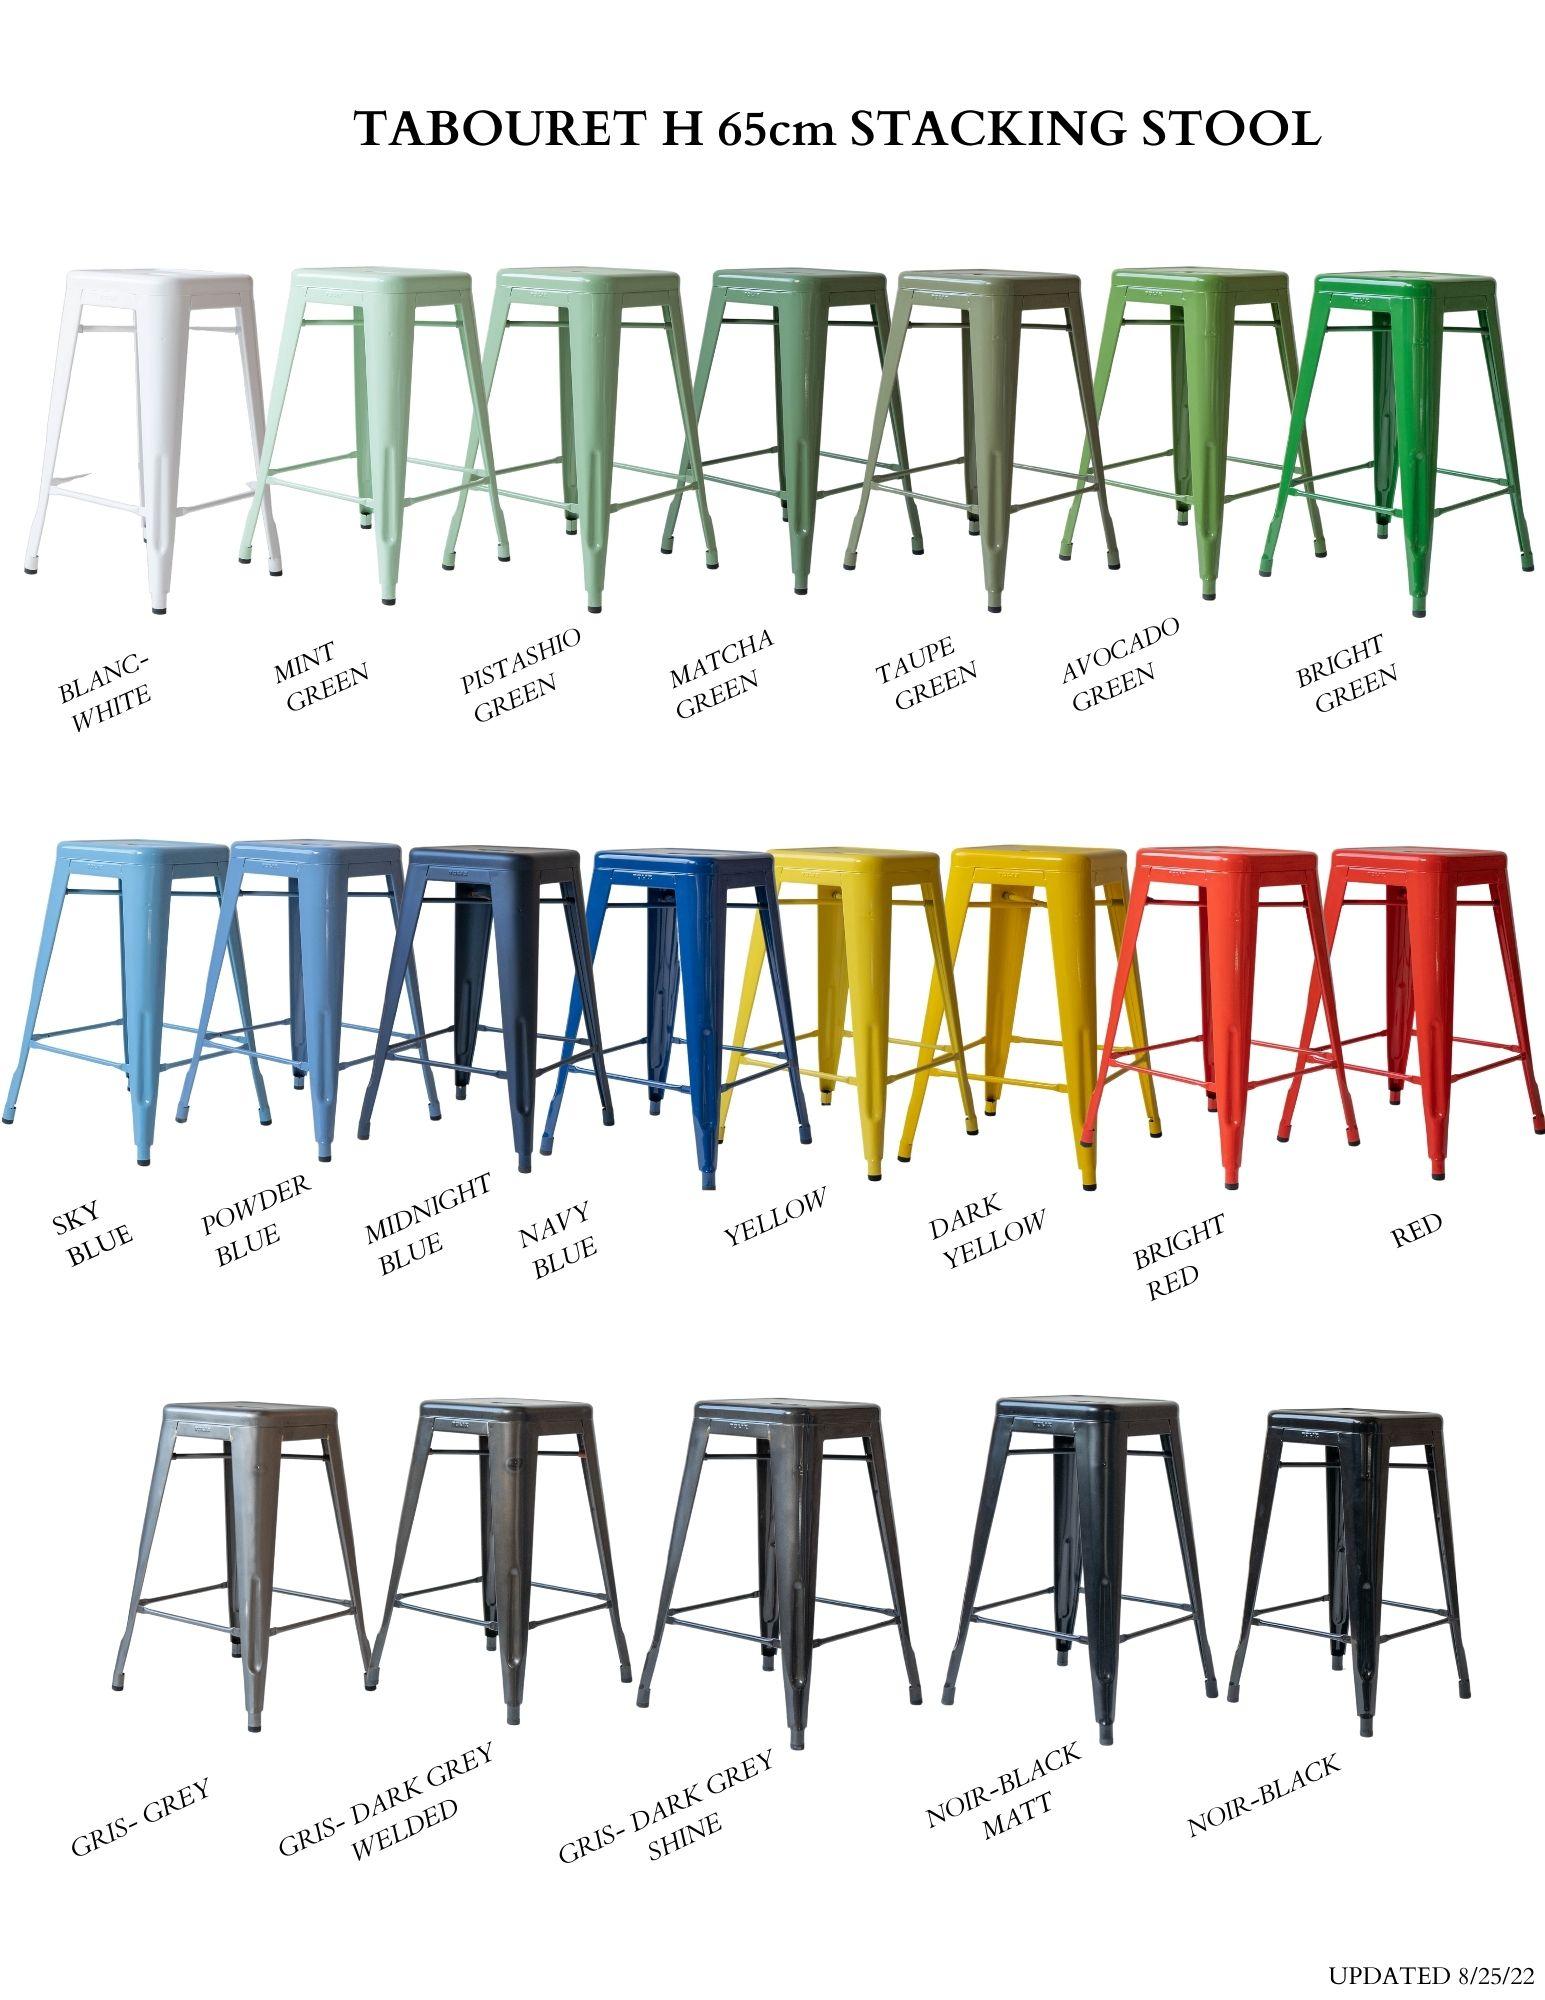 Hand-Painted Genuine Tolix Stacking Stools 100's Showroom Samples to Choose from Most Colors For Sale